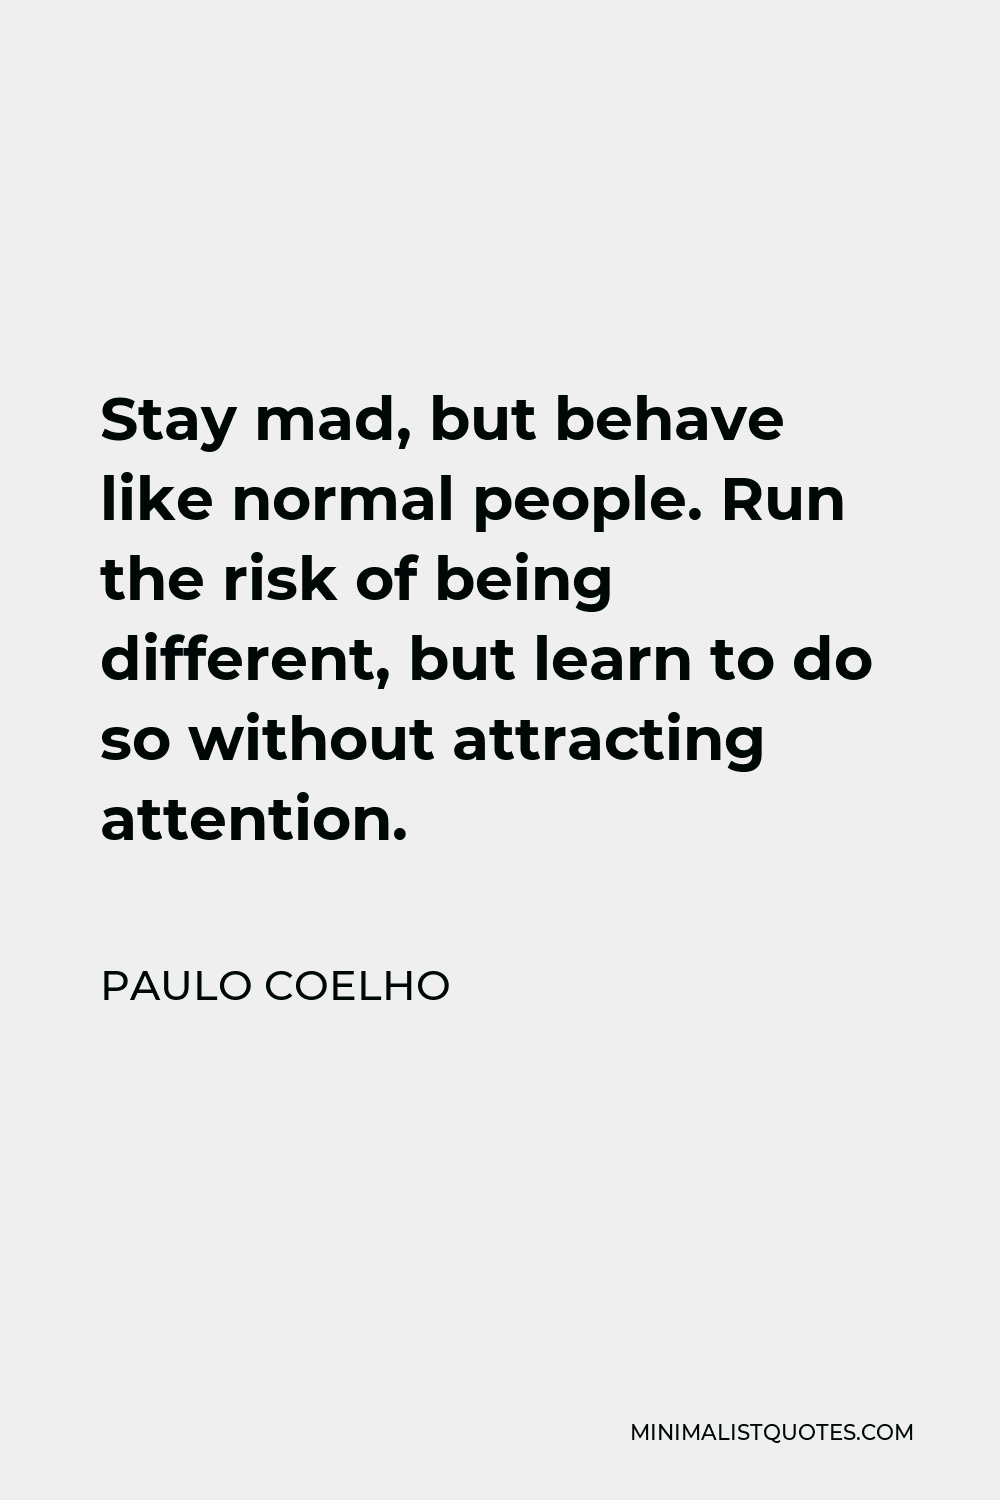 Paulo Coelho Quote - Stay mad, but behave like normal people. Run the risk of being different, but learn to do so without attracting attention.